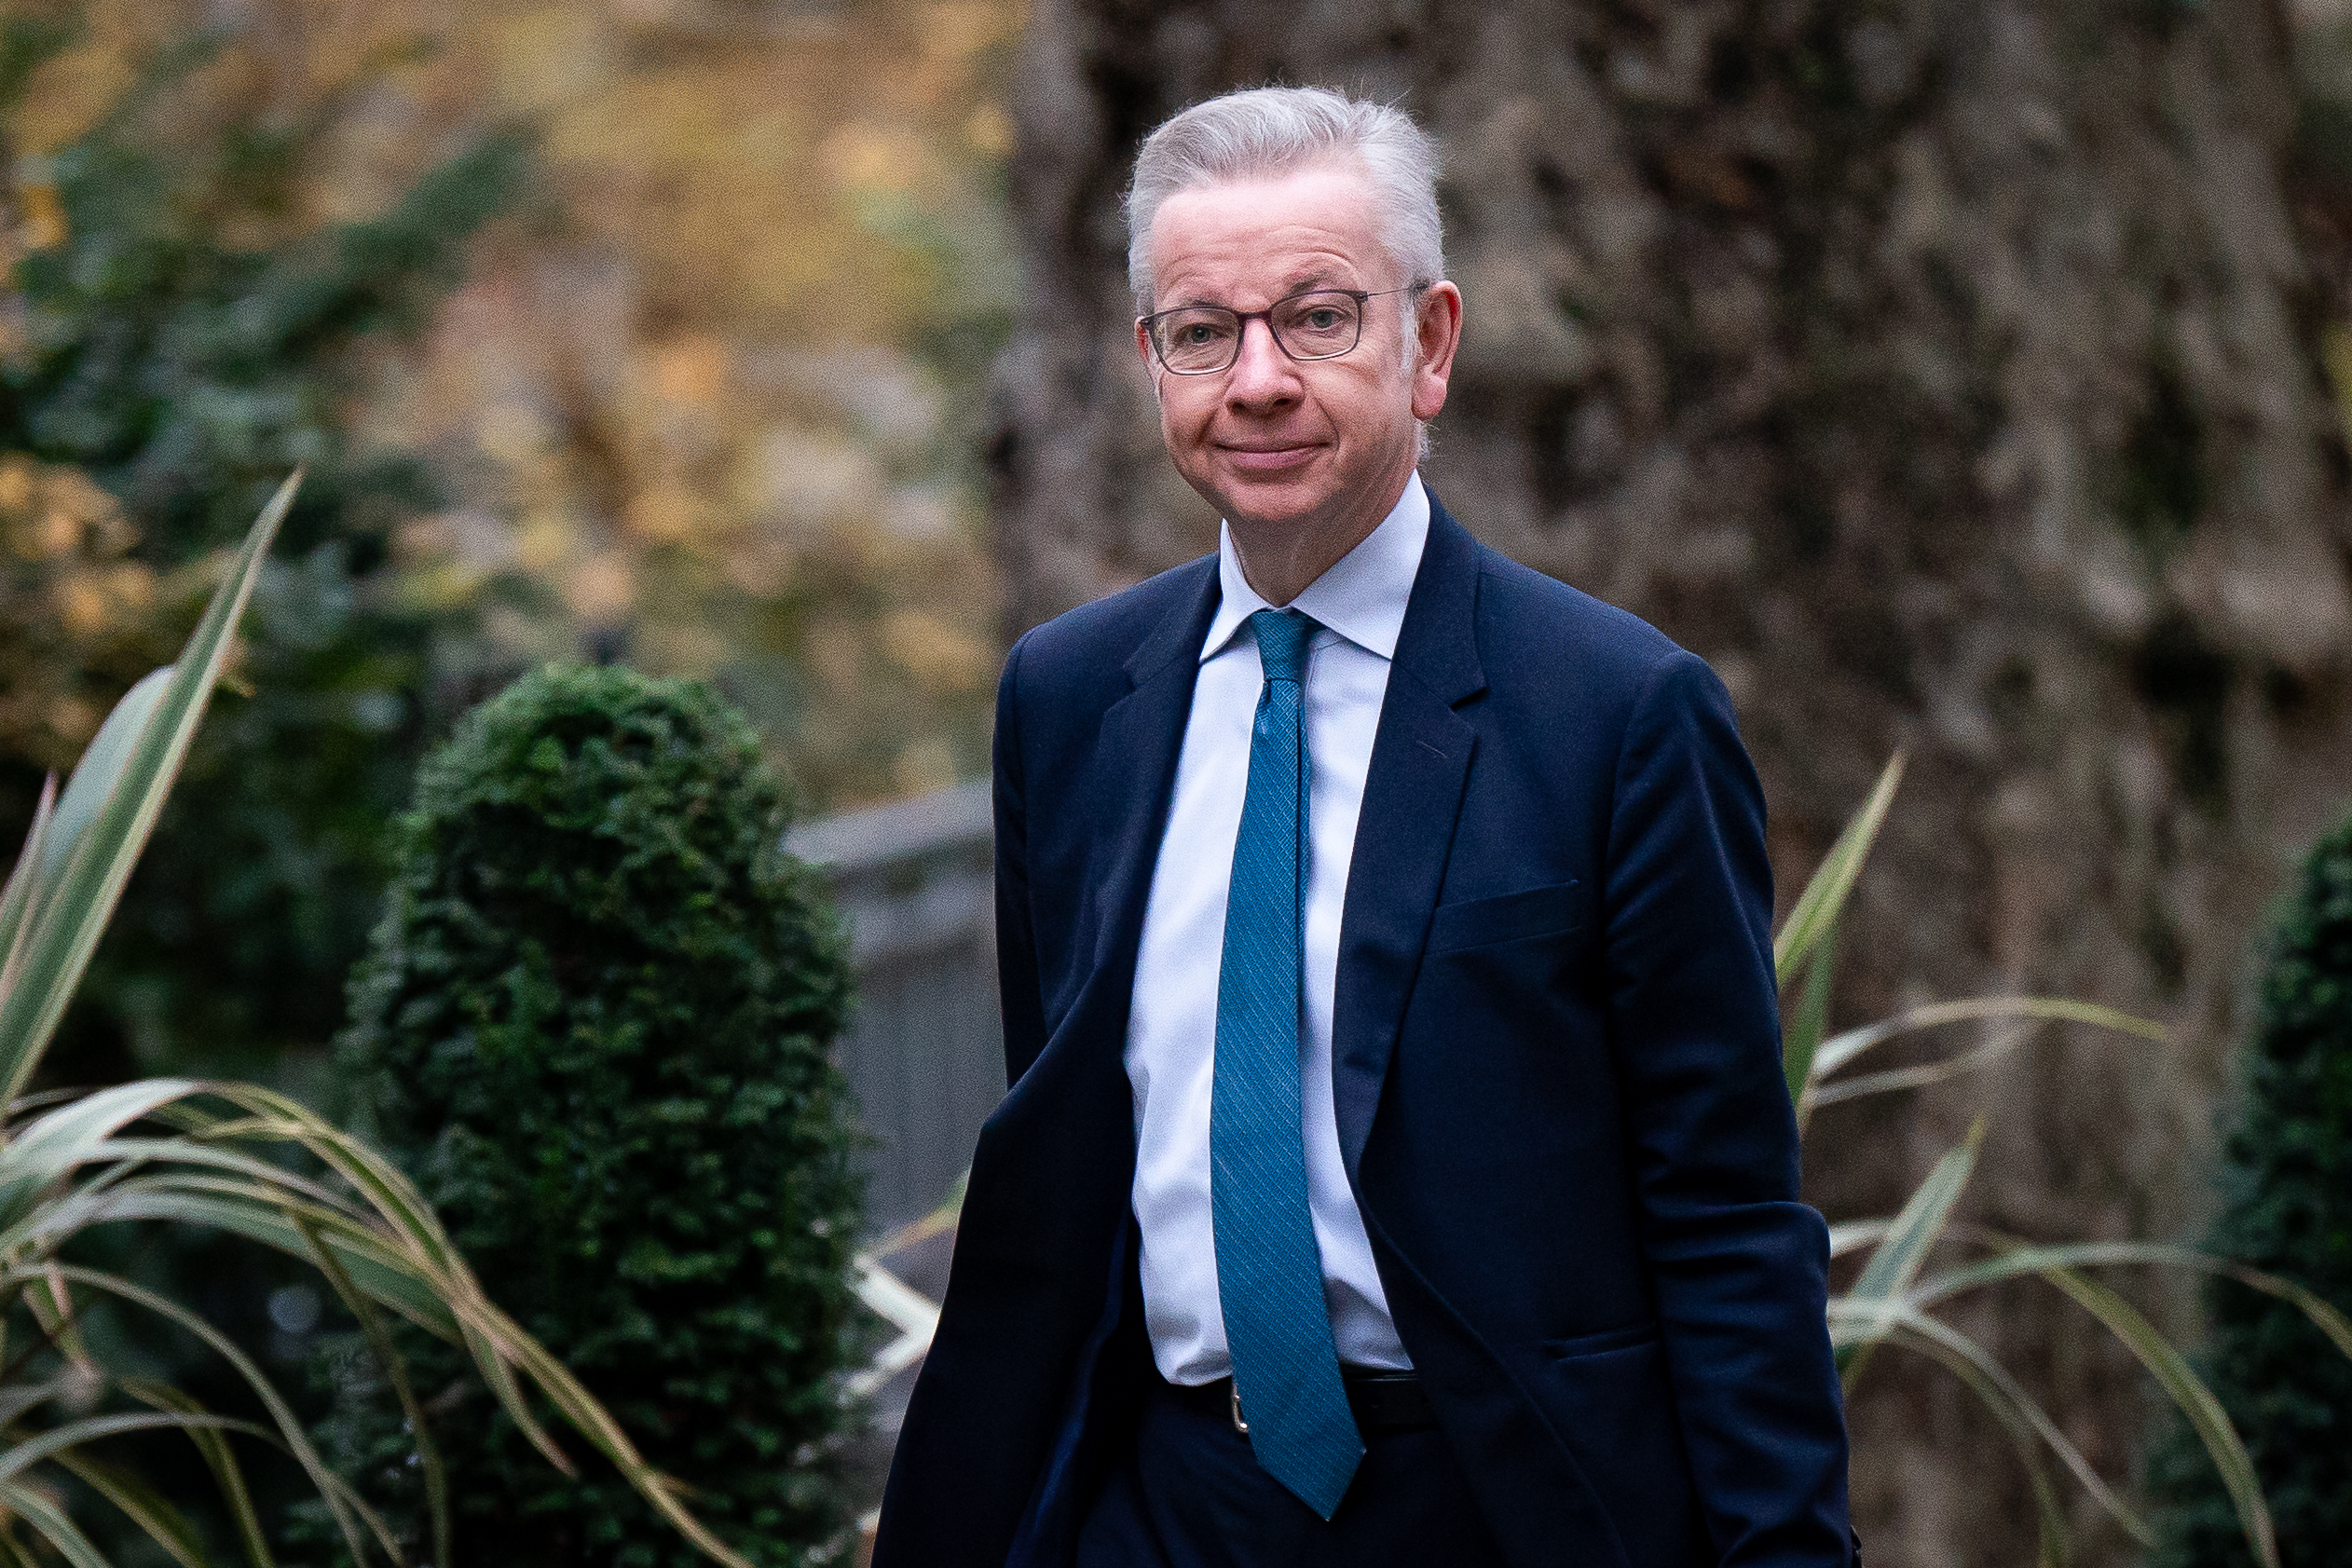 Michael Gove is facing calls to appear before MPs to answer questions over PPE firm Medpro.